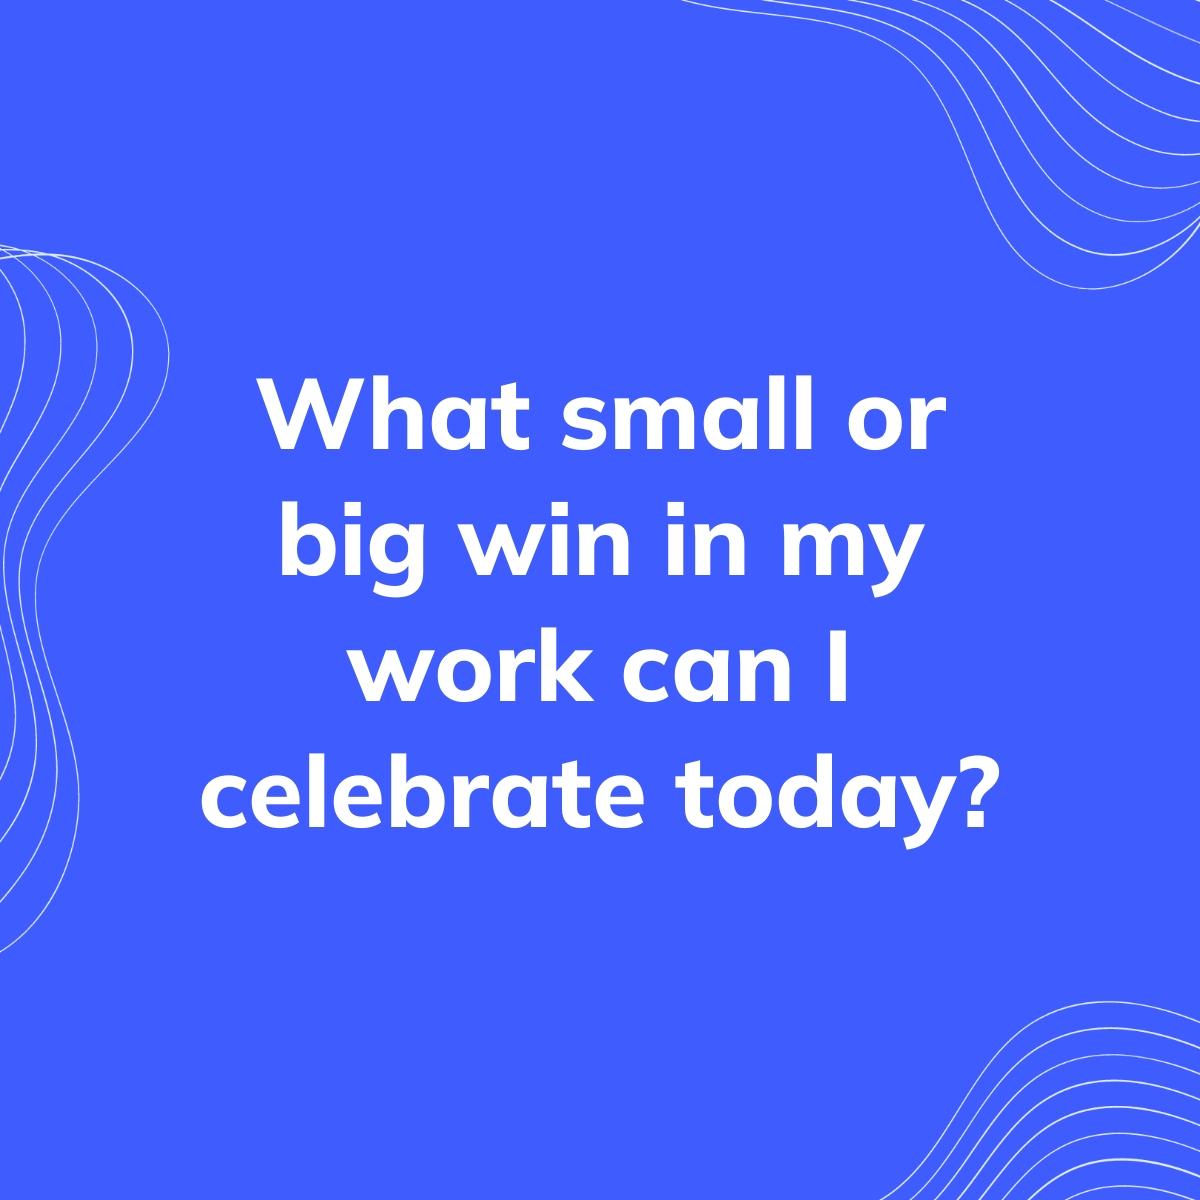 Journal Prompt: What small or big win in my work can I celebrate today?